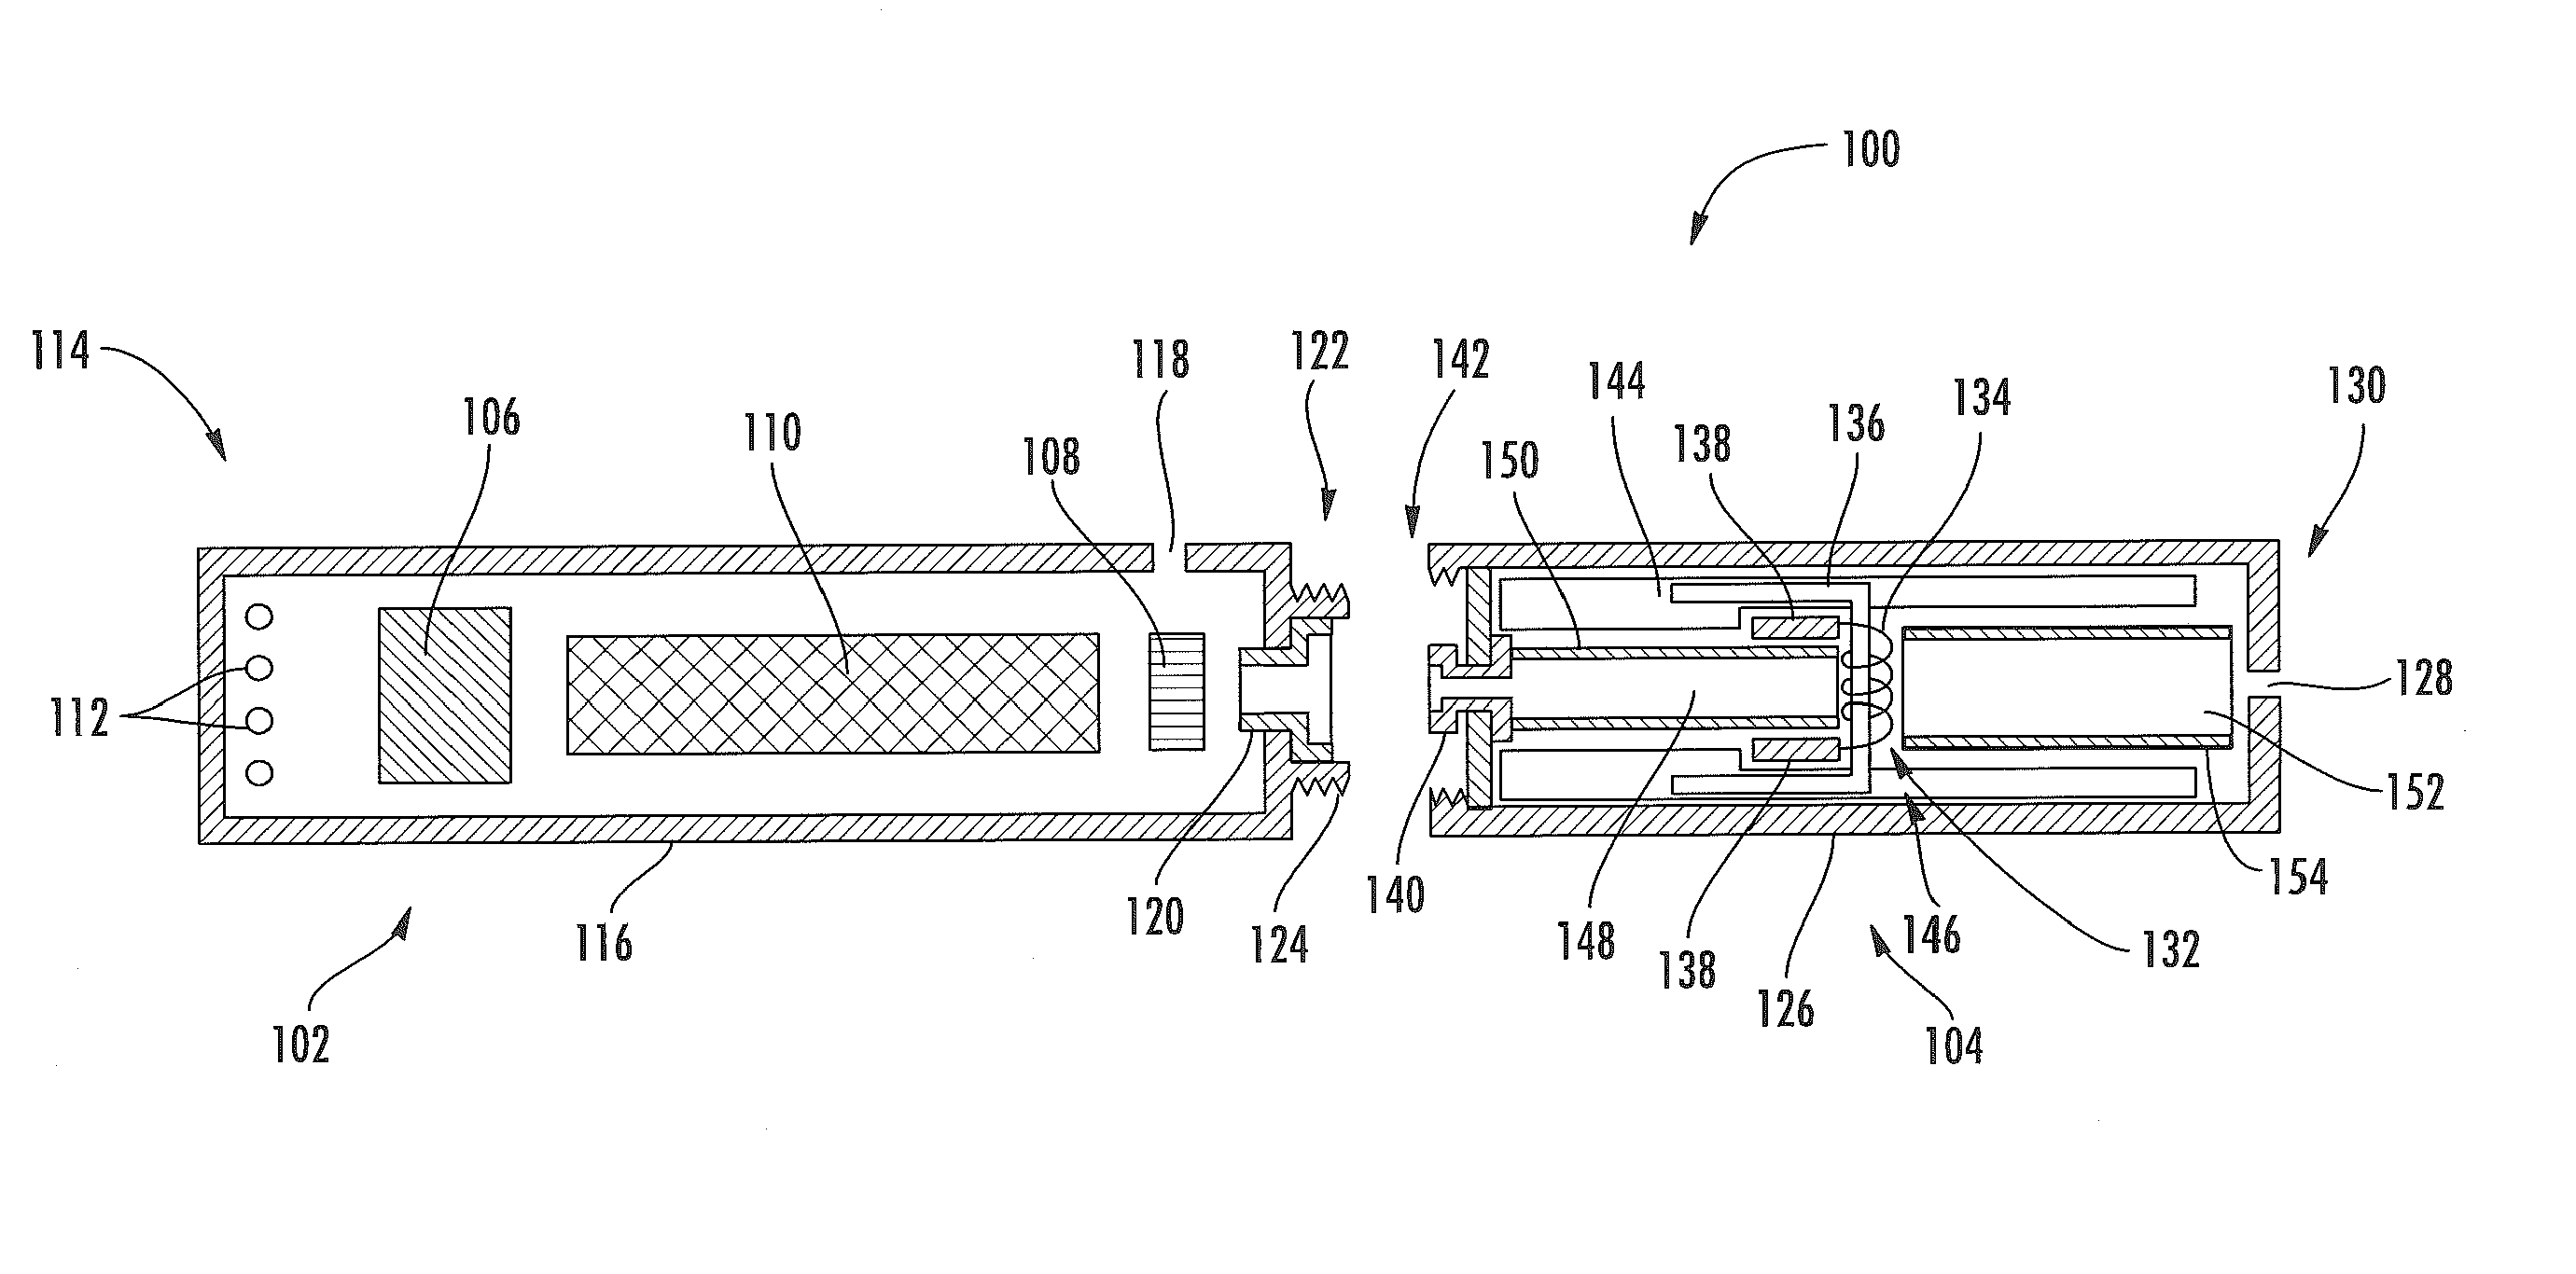 Heating elements formed from a sheet of a material and inputs and methods for the production of atomizers